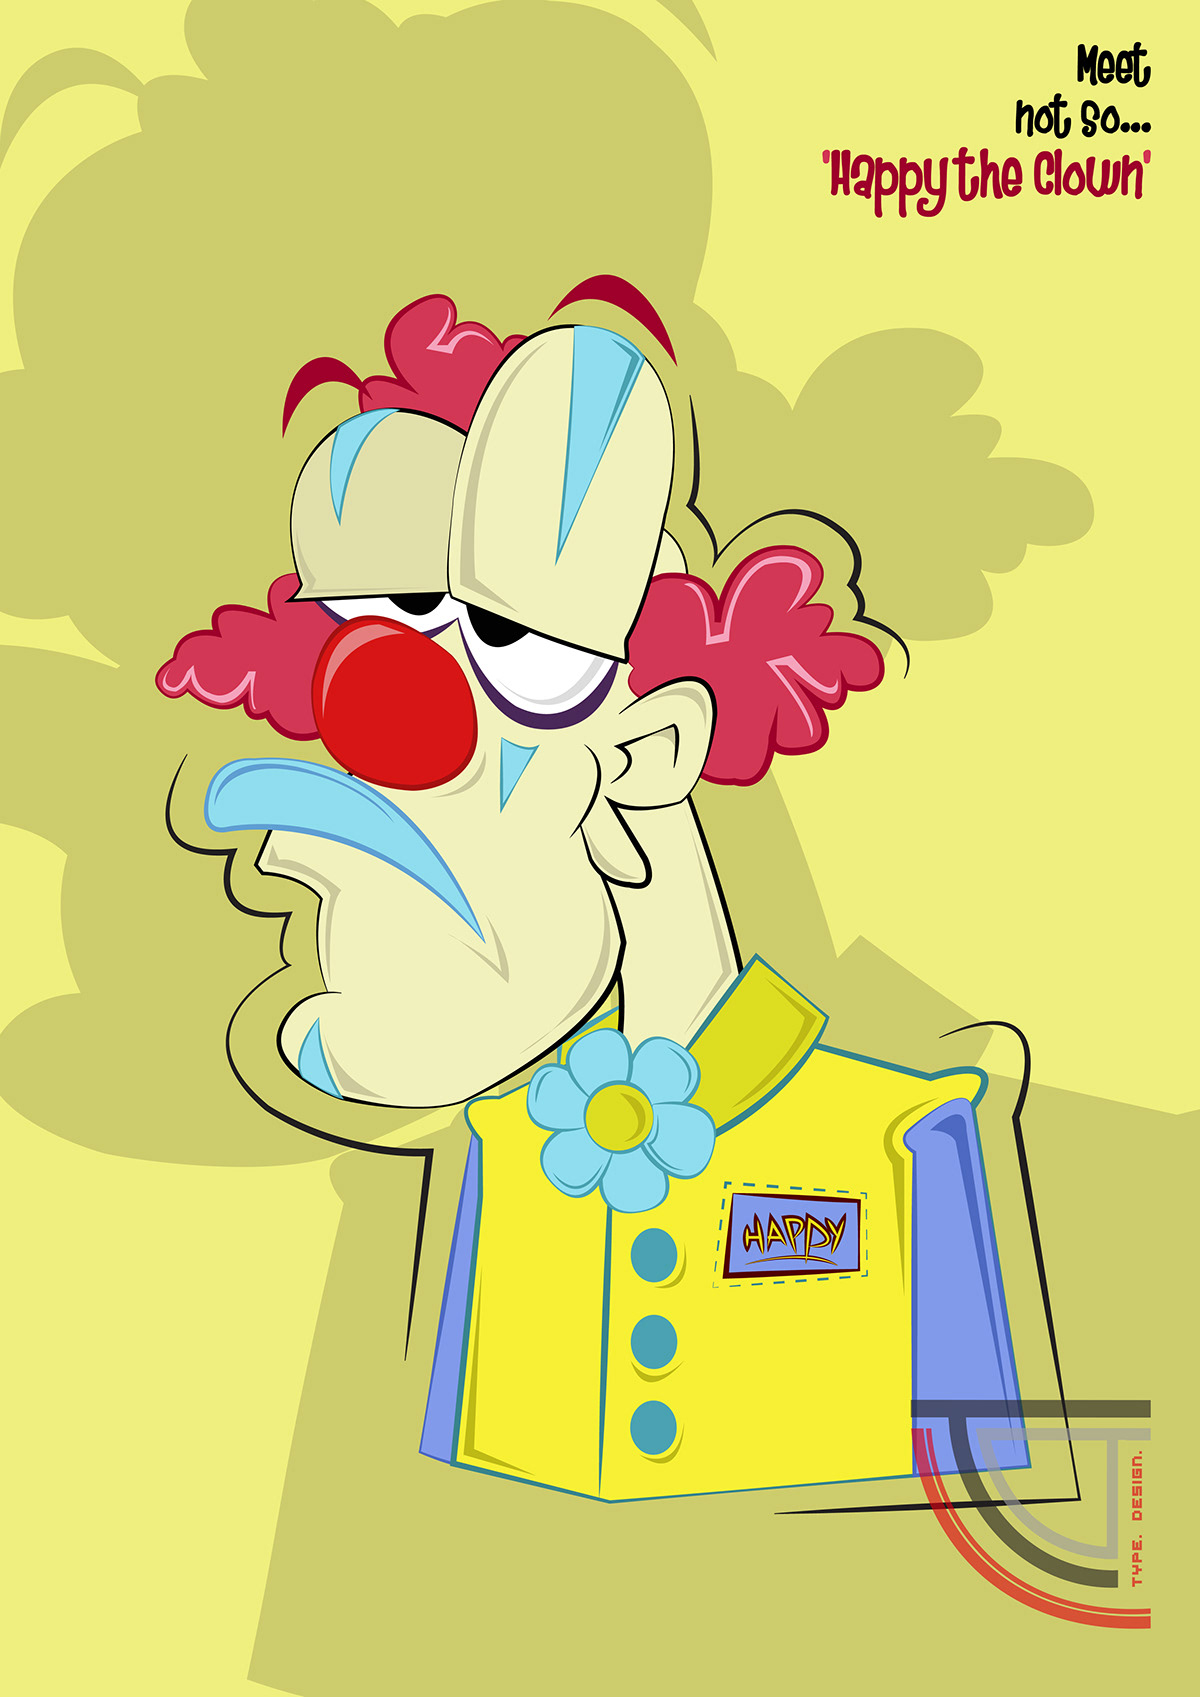 Clowns toons Cartoons Illustrator unhappy characters